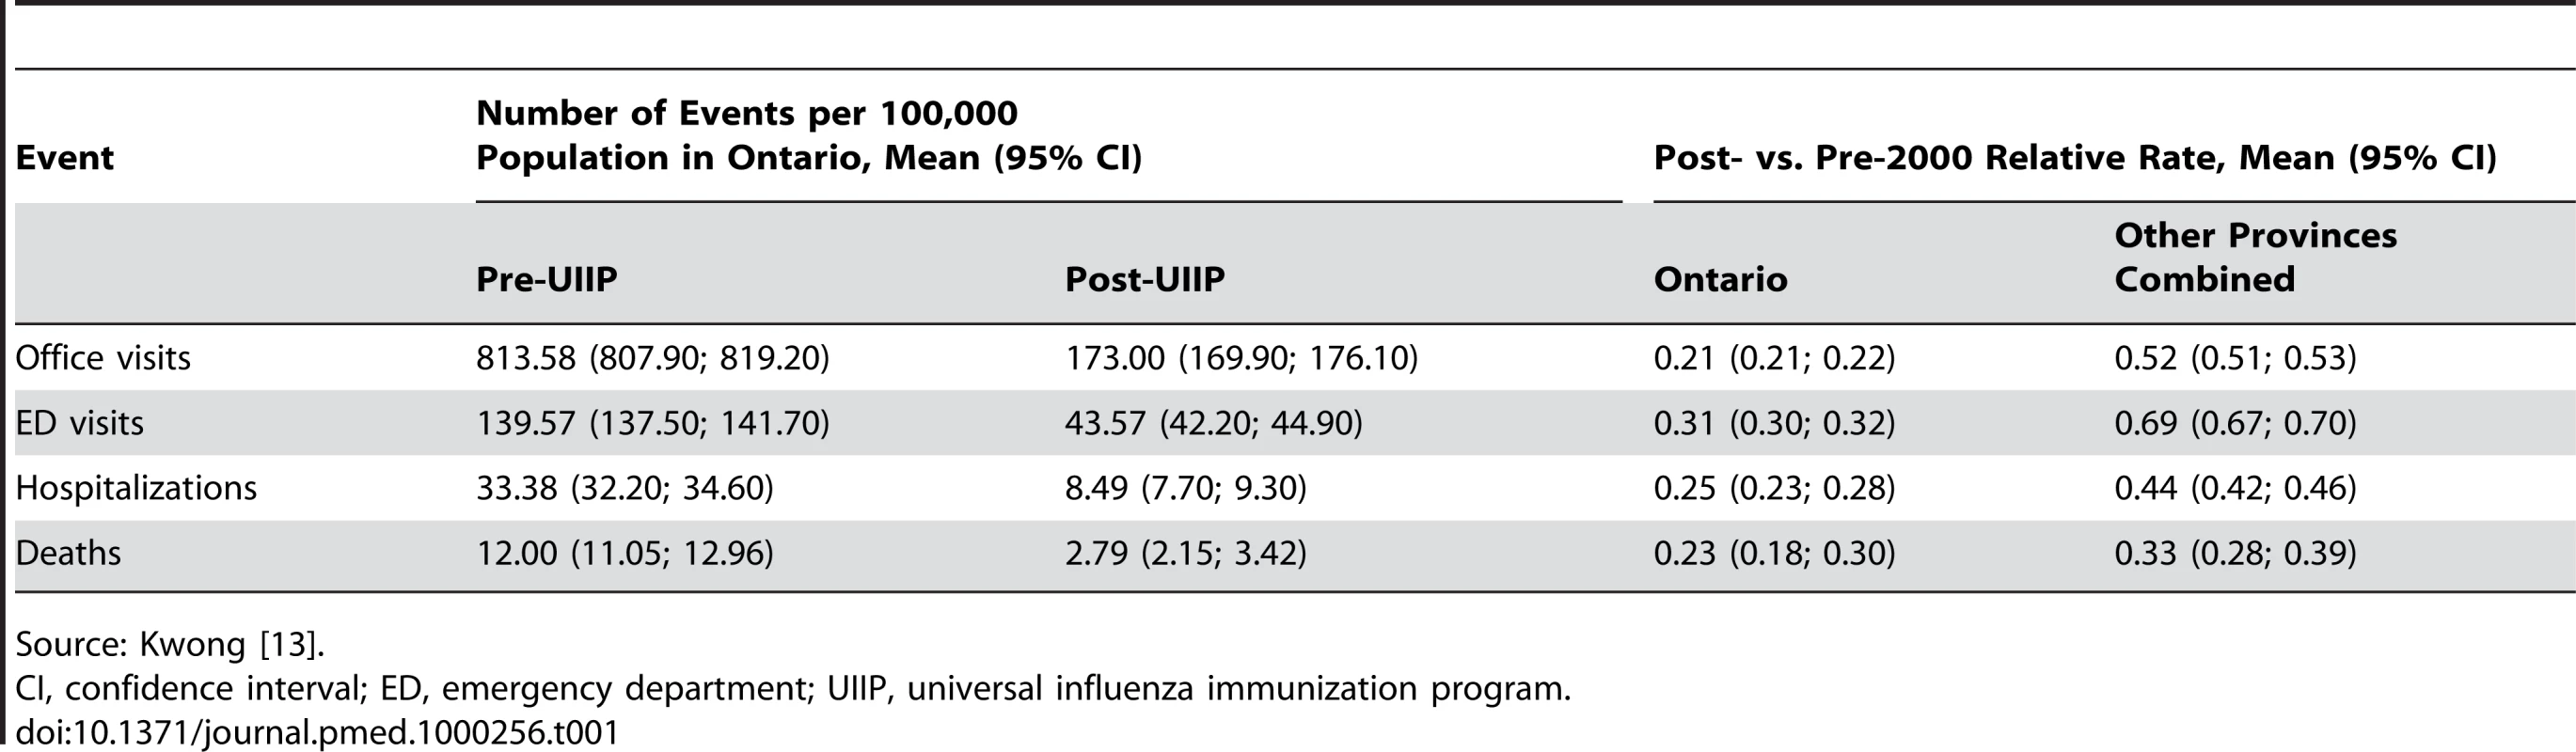 Mean annual influenza-related event rates and relative rates comparing post-UIIP to pre-UIIP event rates.